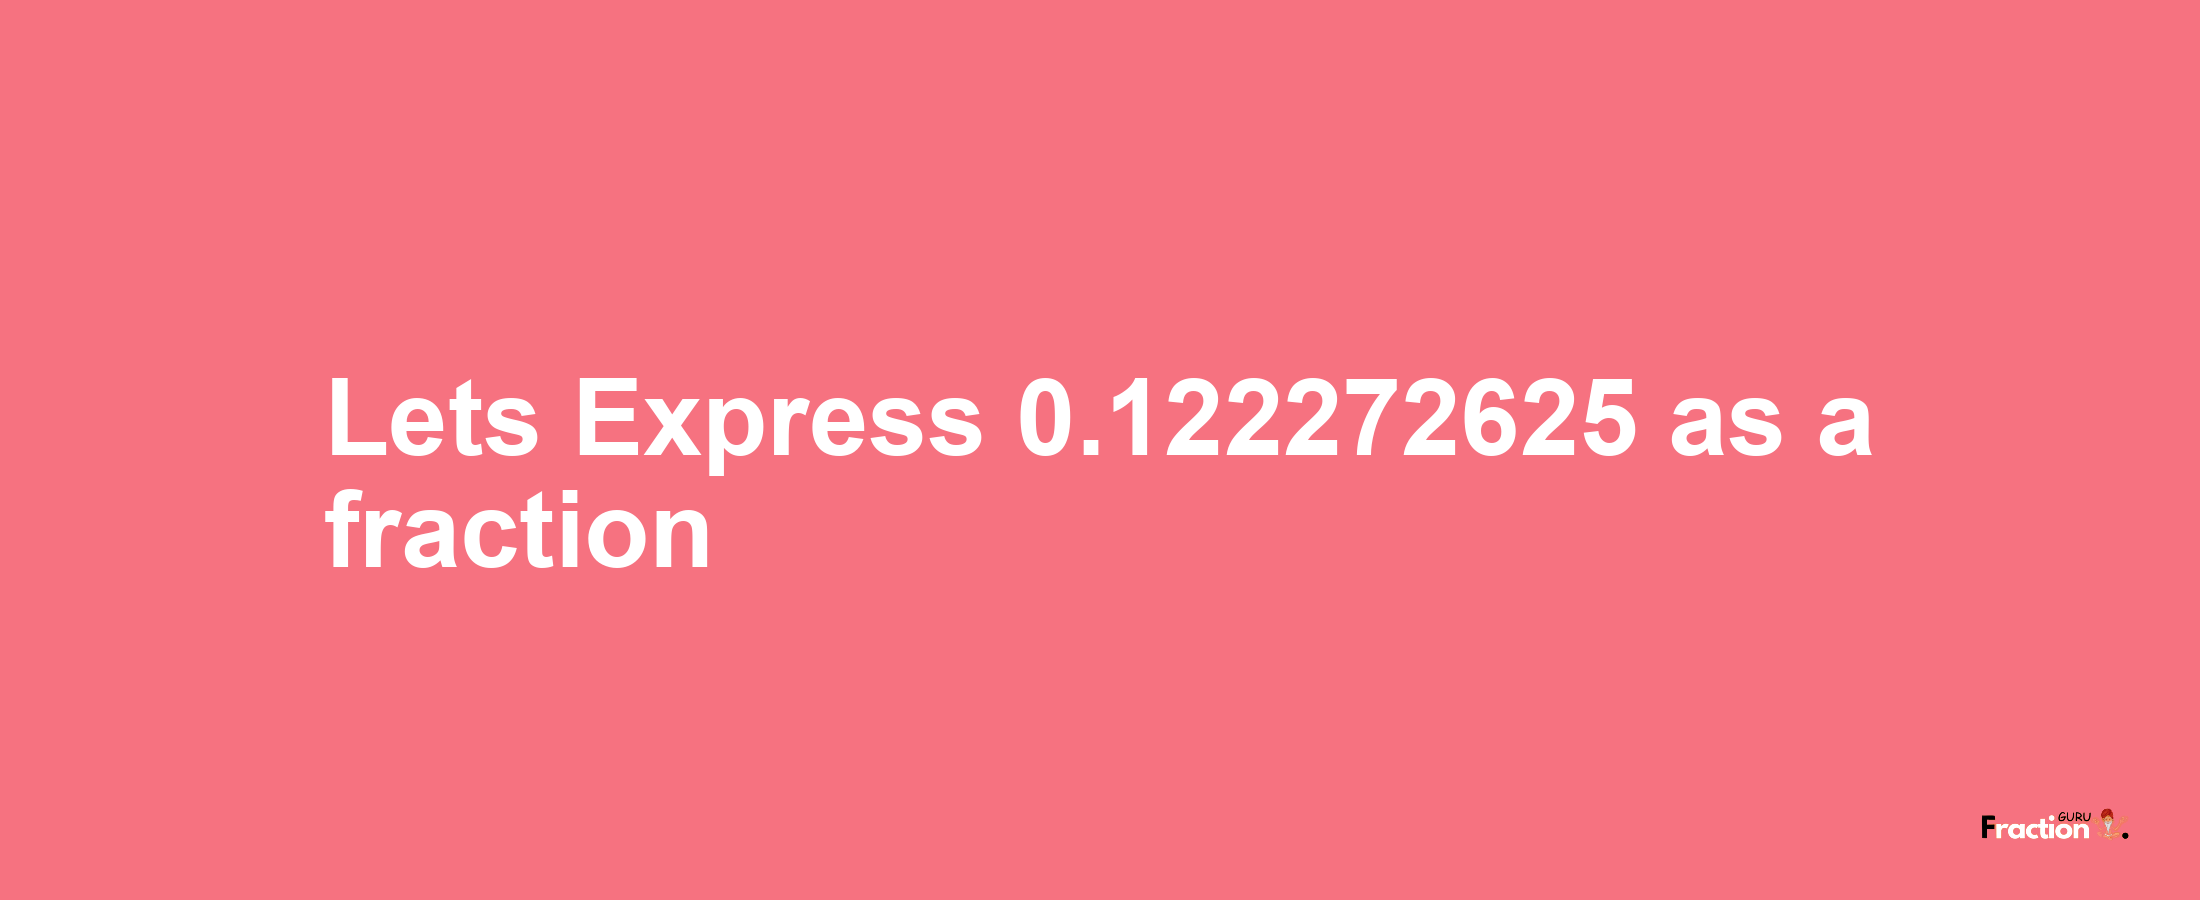 Lets Express 0.122272625 as afraction